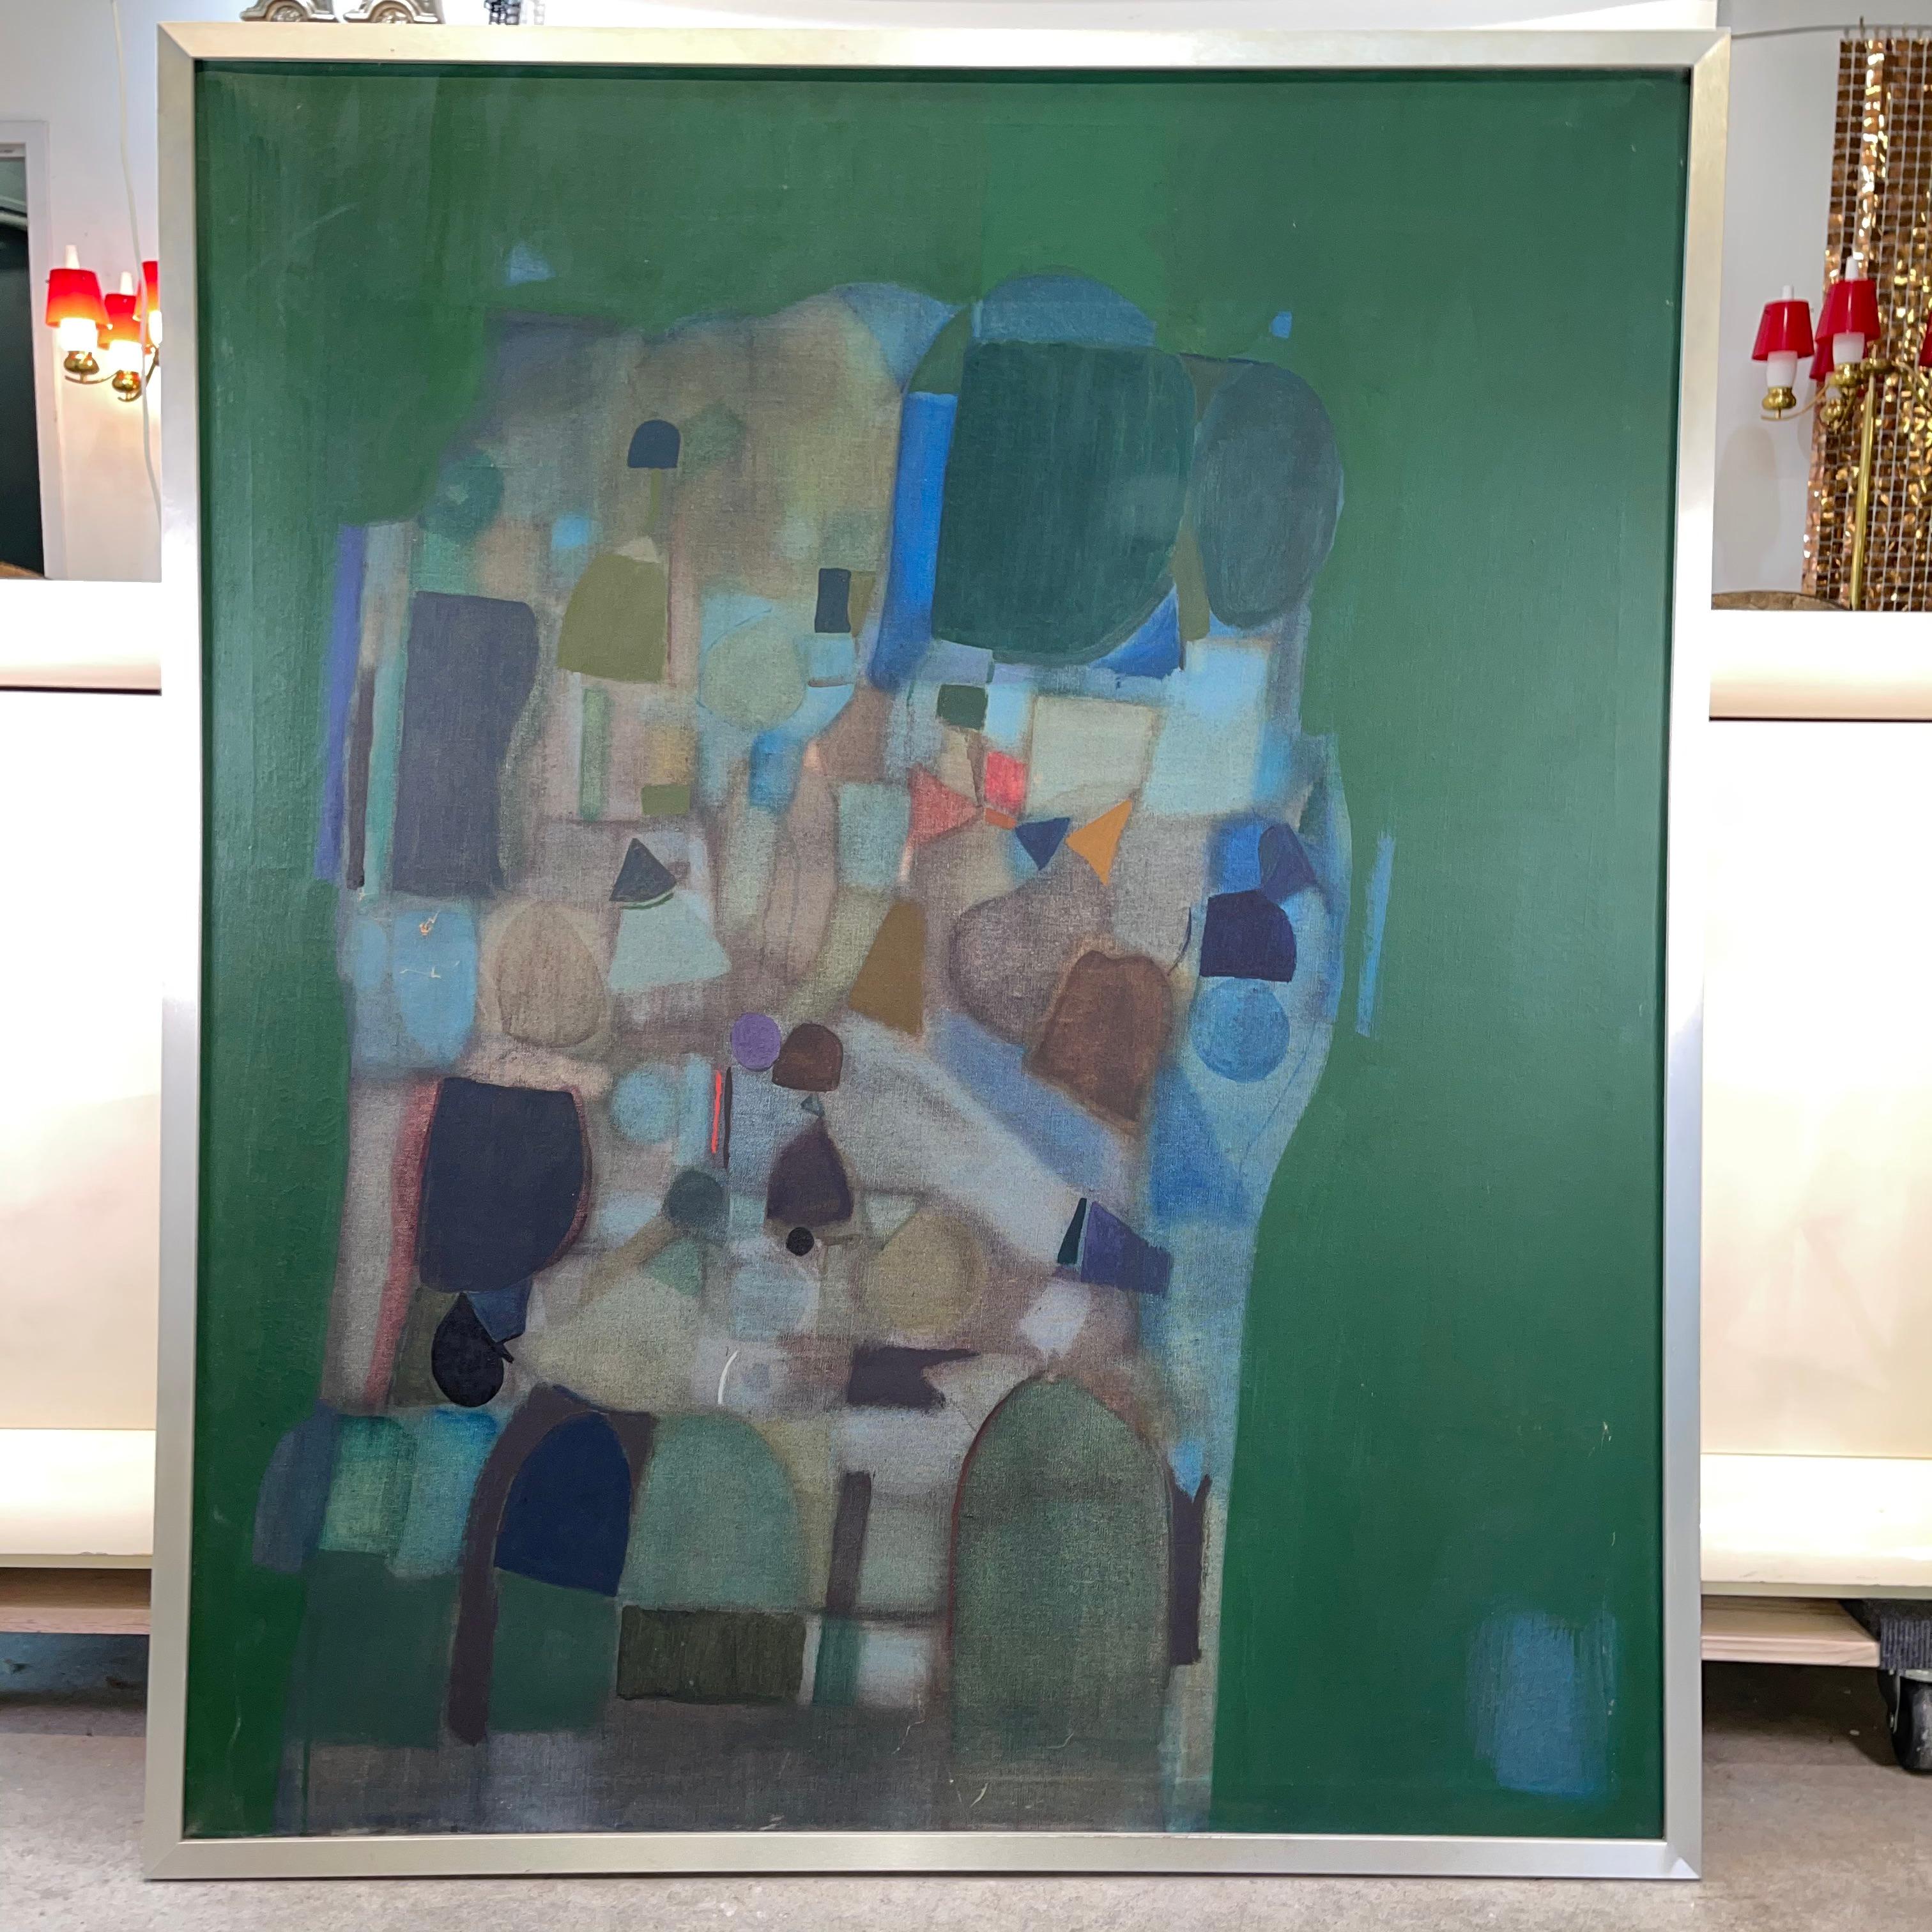 Large abstract modernist oil on canvas painting by Joseph Raffaele / Raffael (born 1933) from his first solo exhibition at Kanegis Gallery, Newbury St. Boston in November 1958.
Concurrently Raffaele had left for Italy on a two year Fulbright